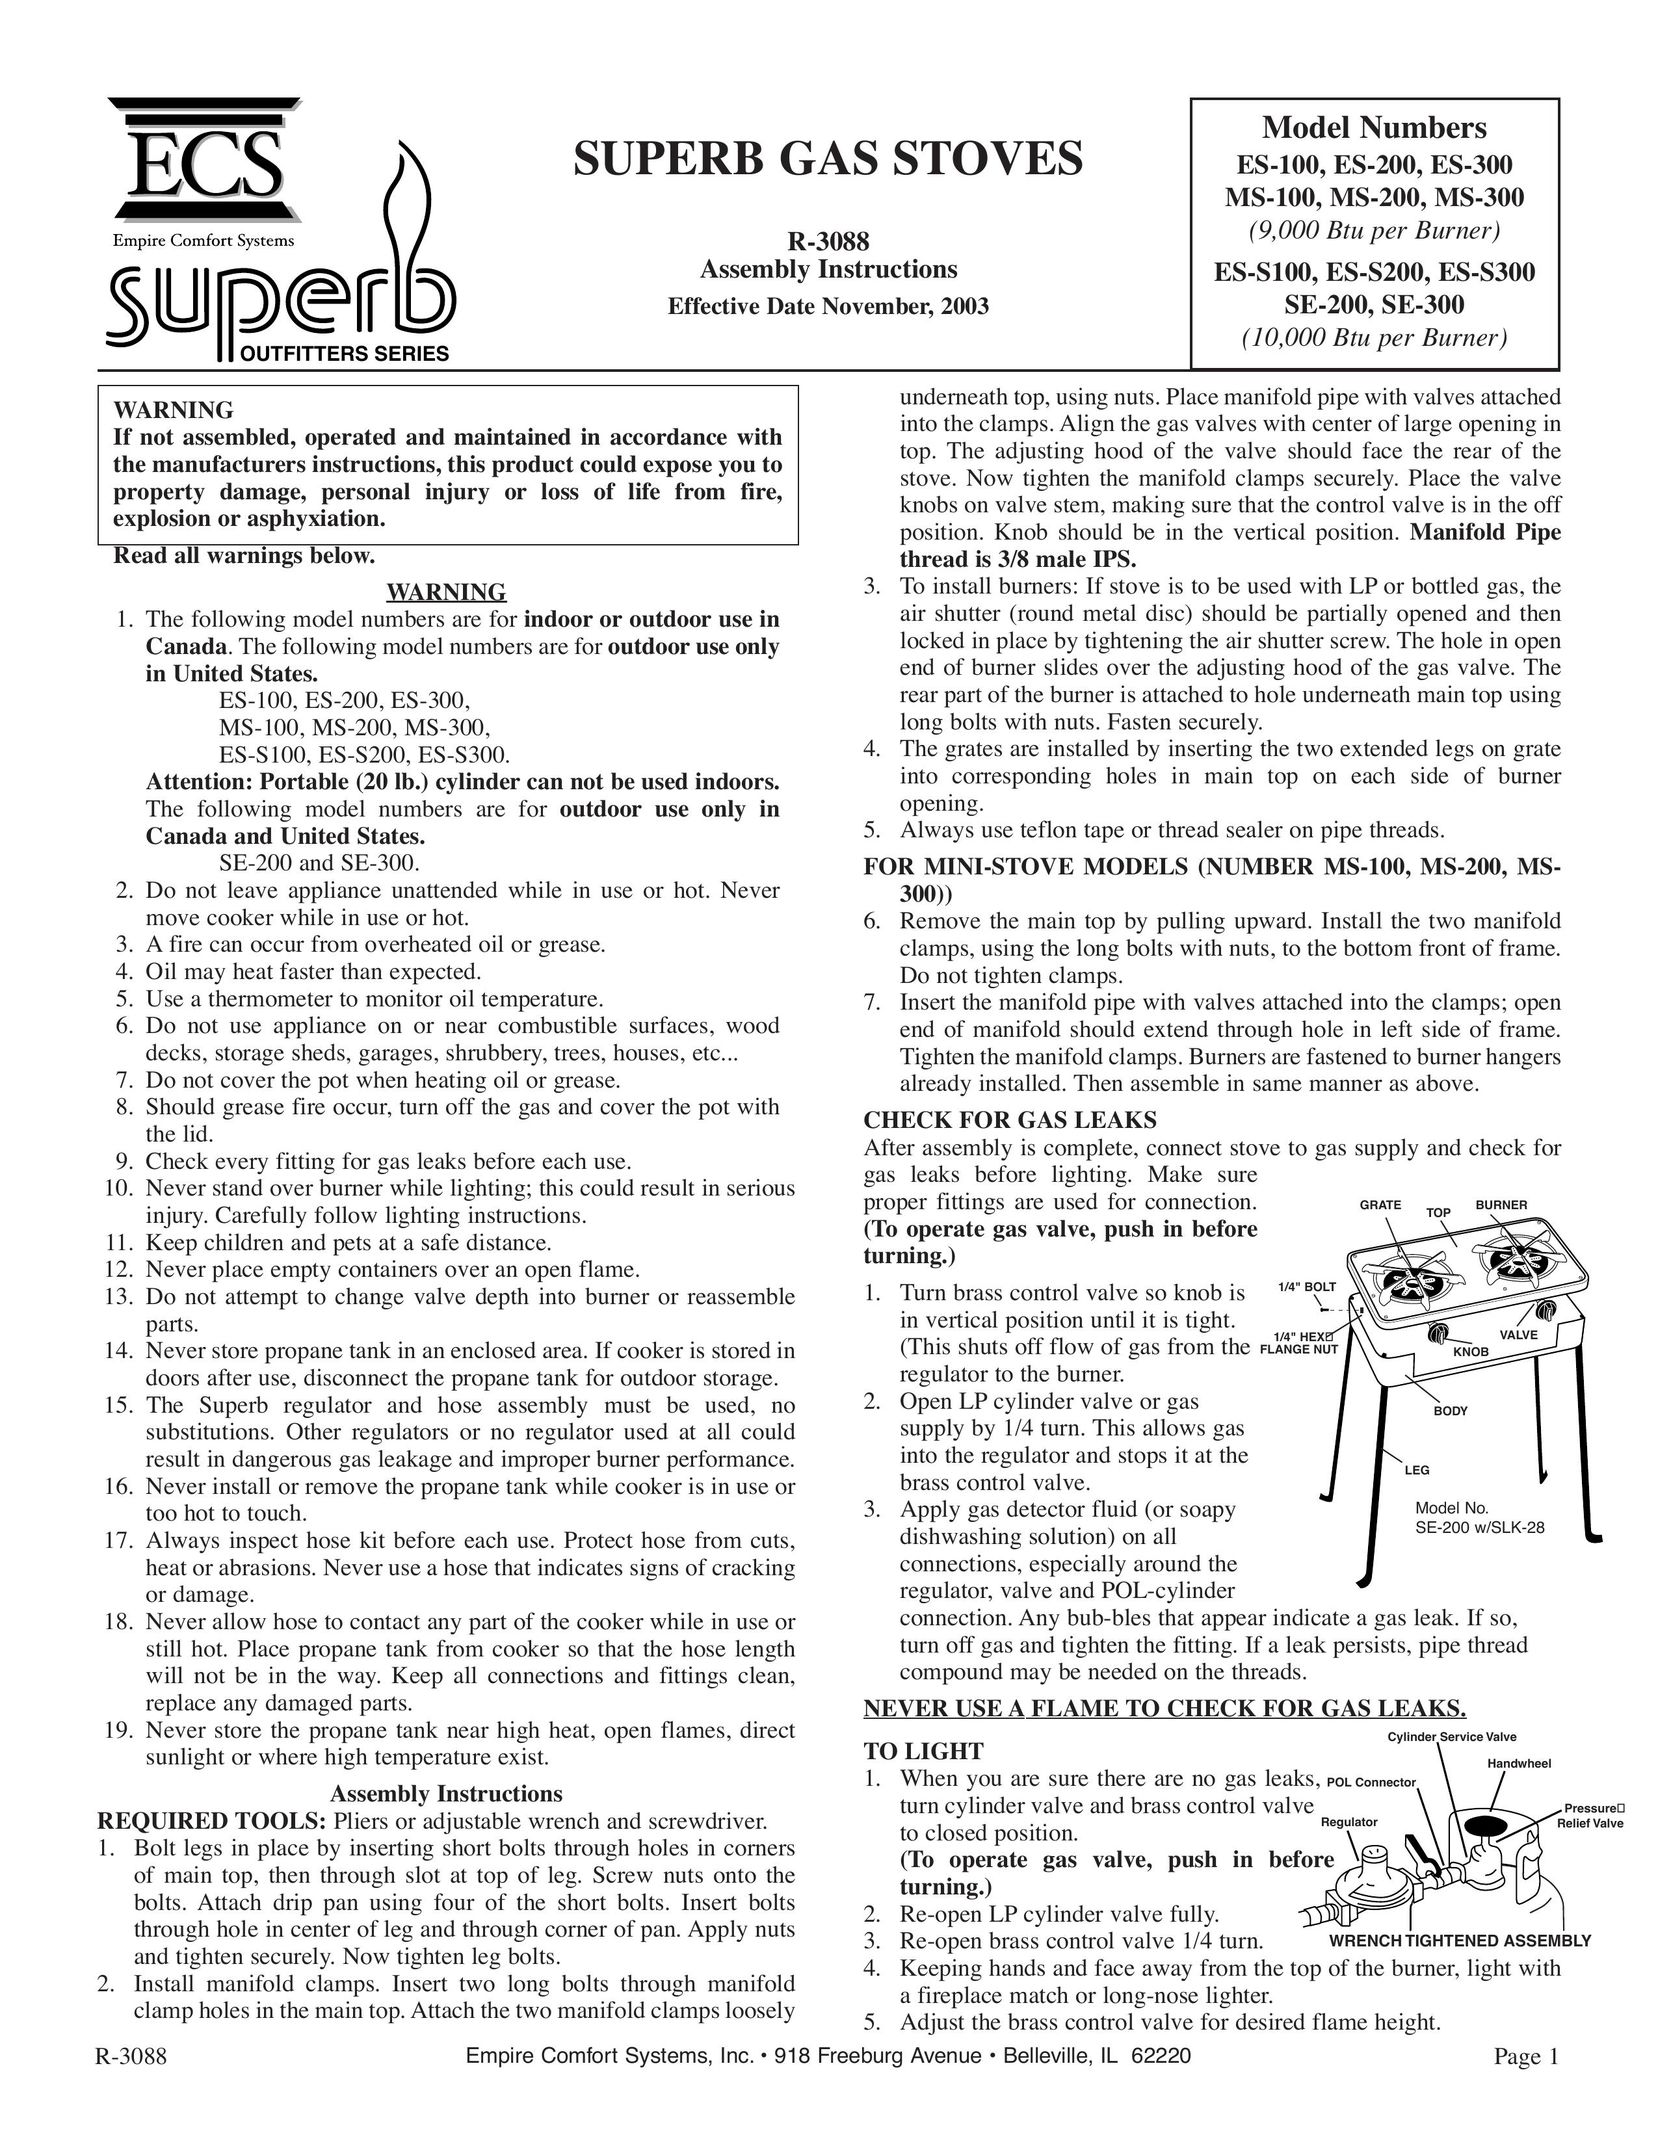 Empire Comfort Systems ES-S200 Stove User Manual